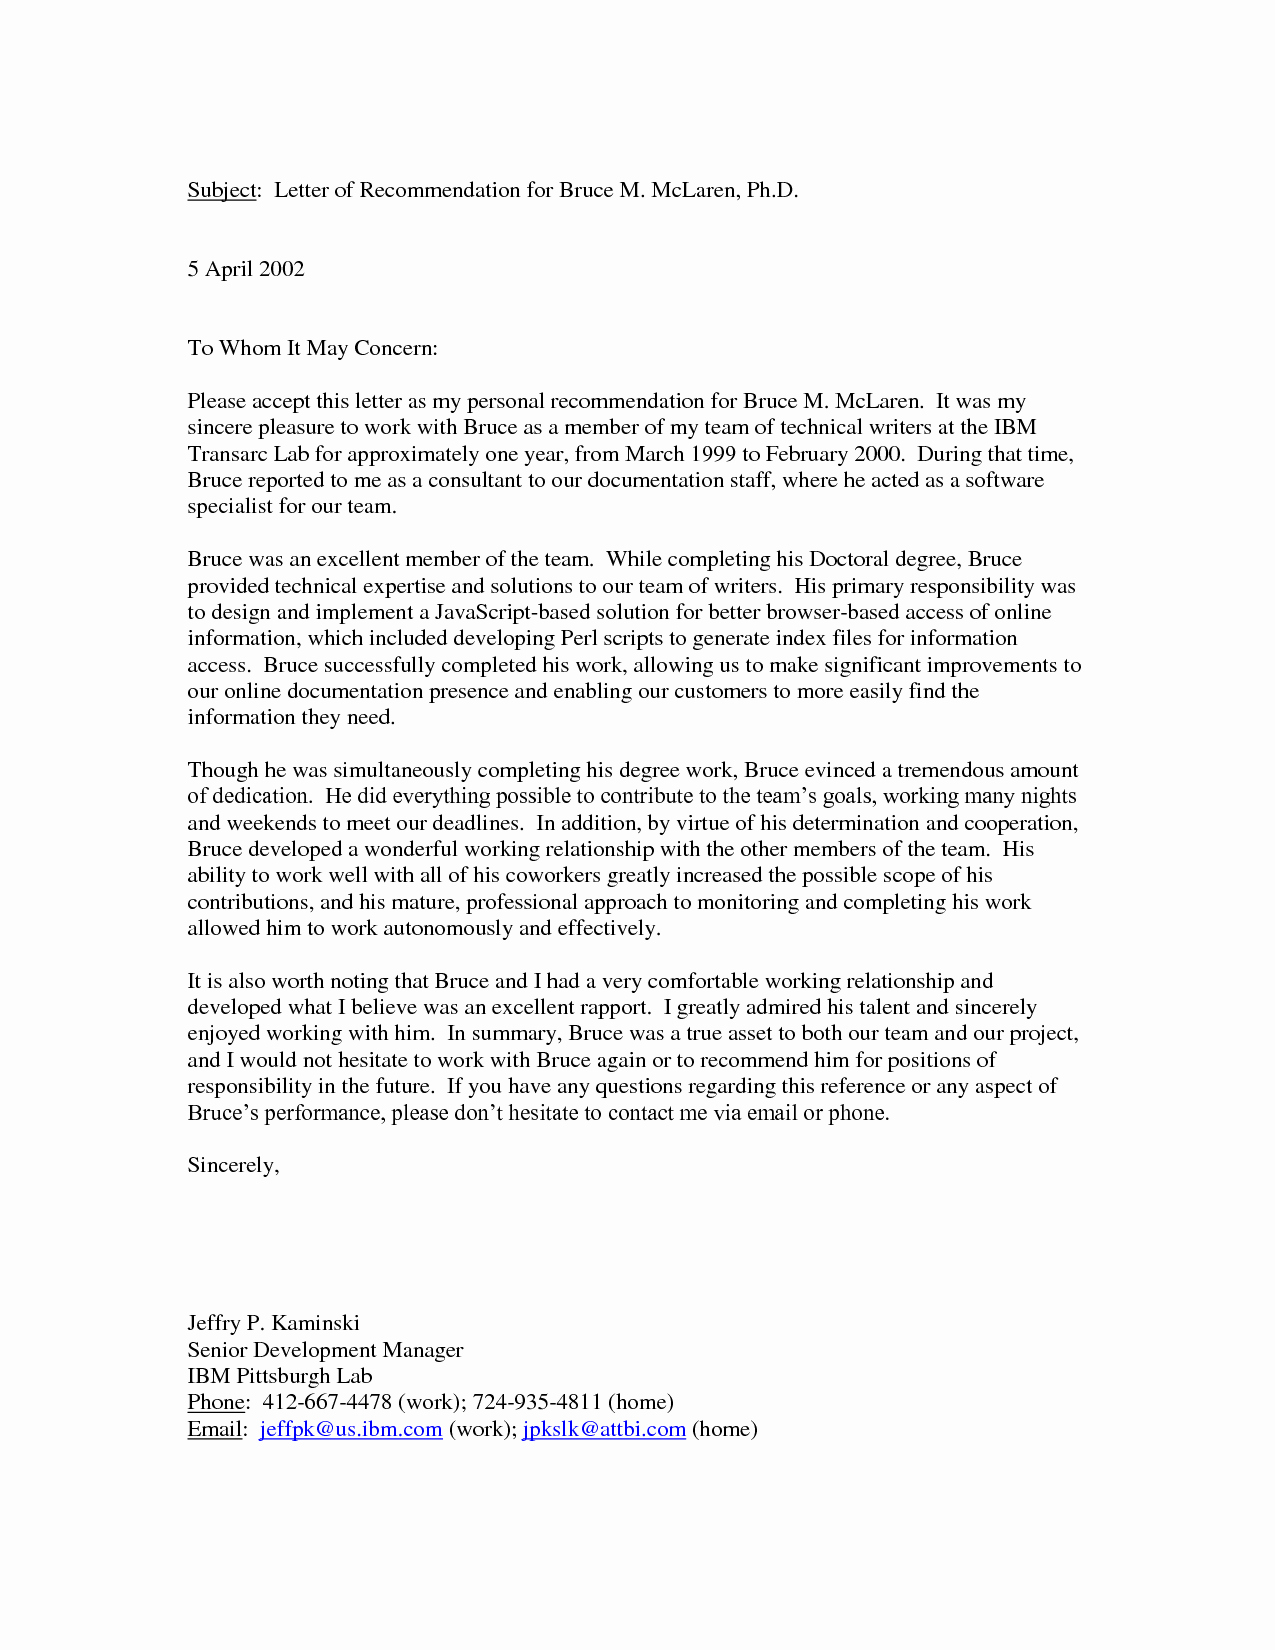 Recommendation Letter Template 50 Personal Recommendation Letter Template Culturatti